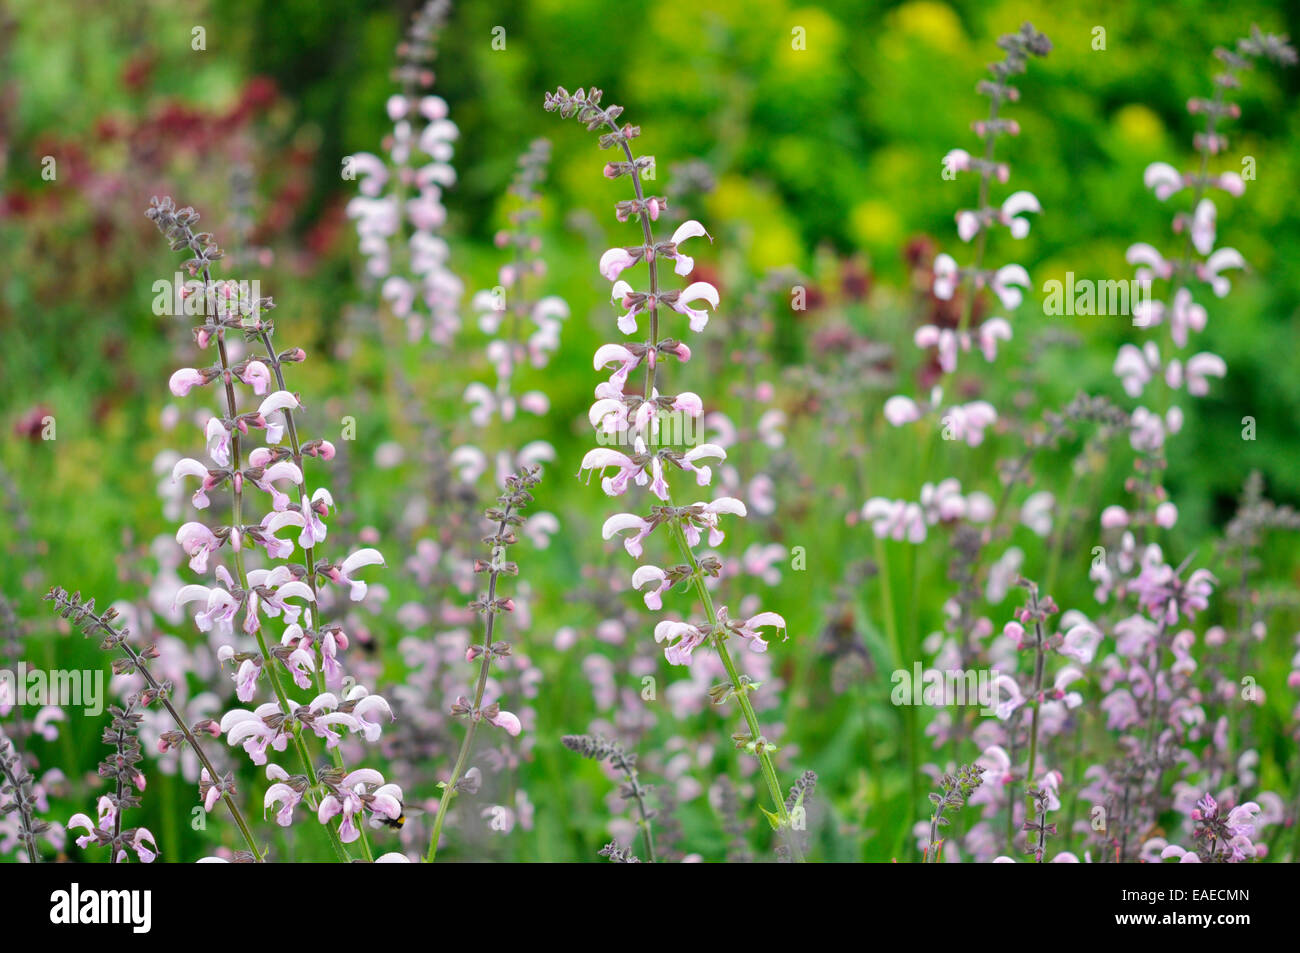 Salvia Pratense as a pale pink form growing in an English garden. Stock Photo